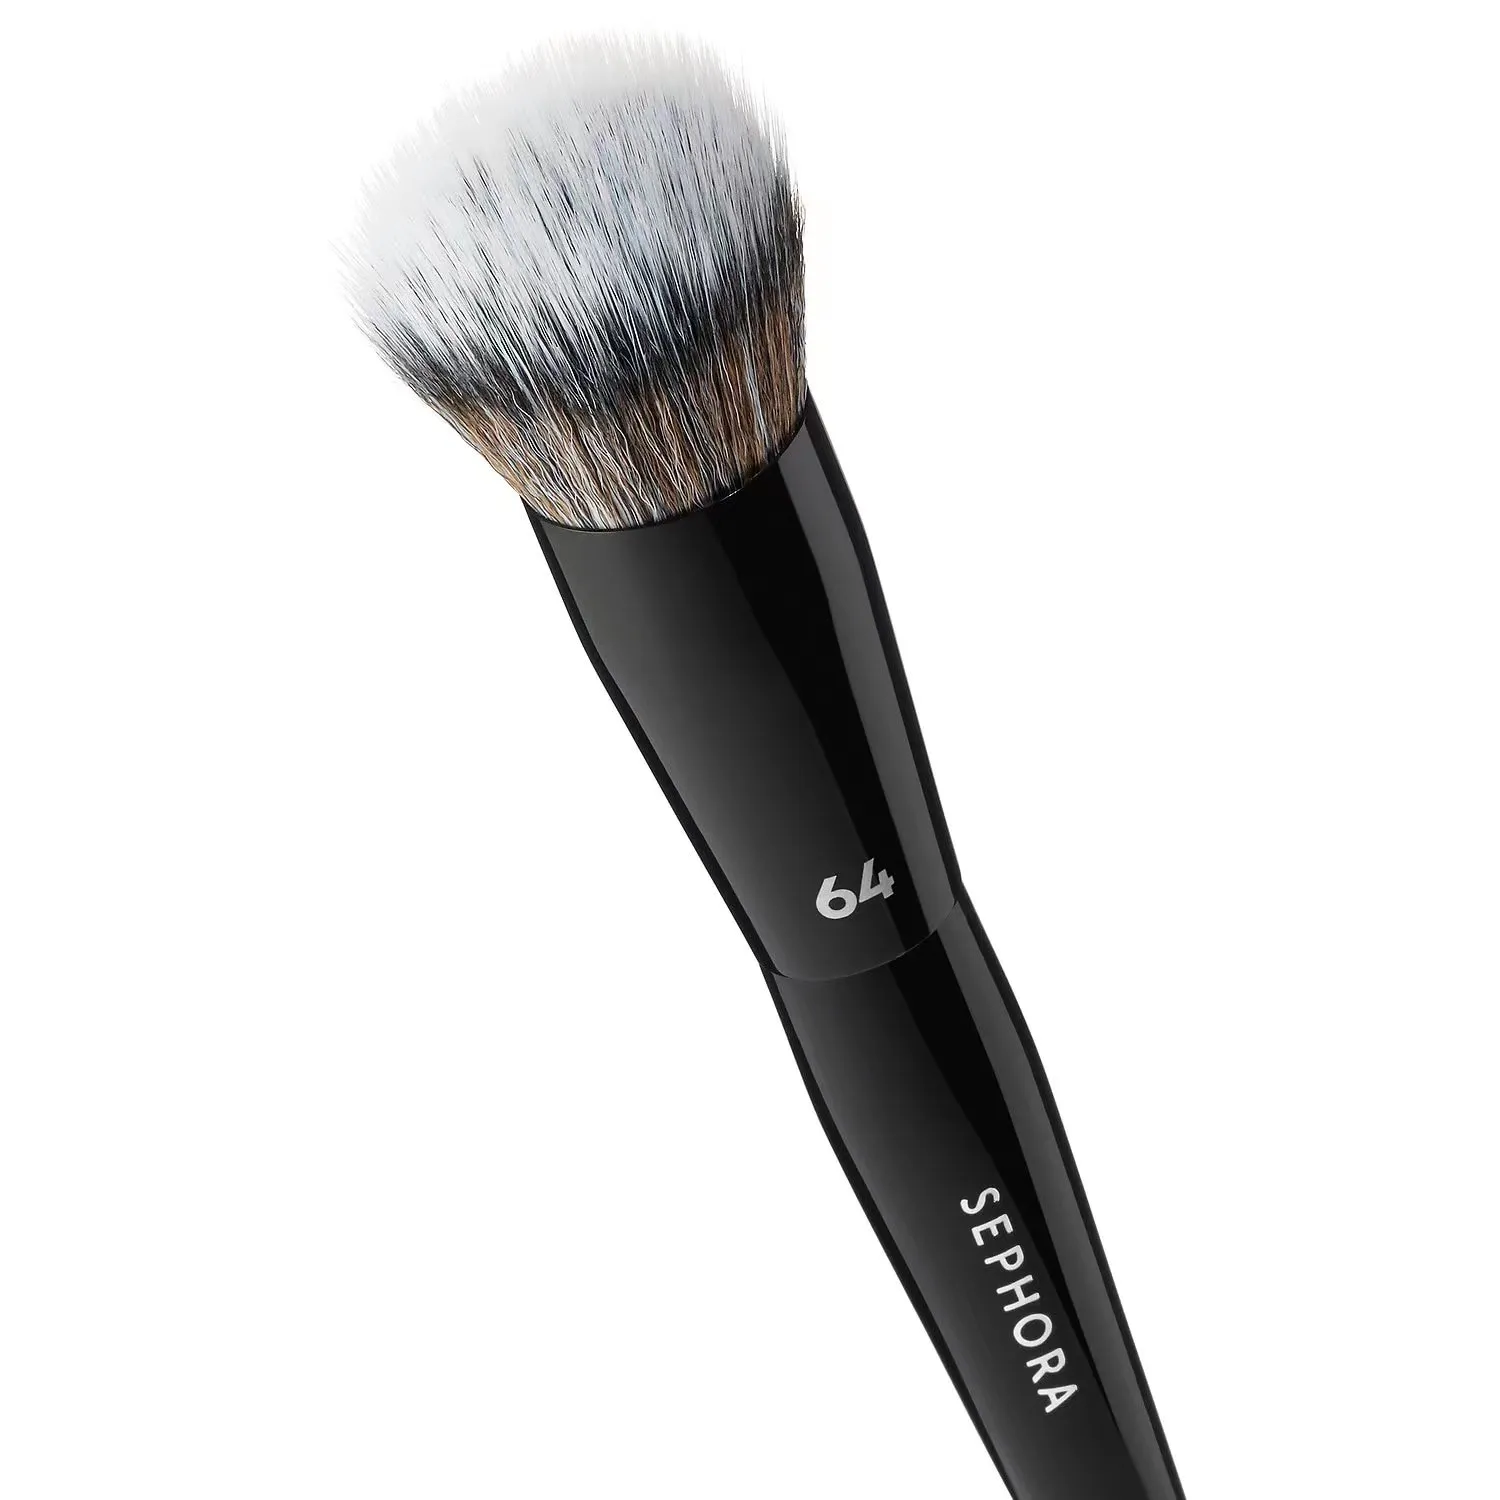 SEP Collection N°64 Foundation Brush - PRO Foundation Makeup Brushes Loose Bowder Domed Medium-Sized Foundation Cosmetics Tools